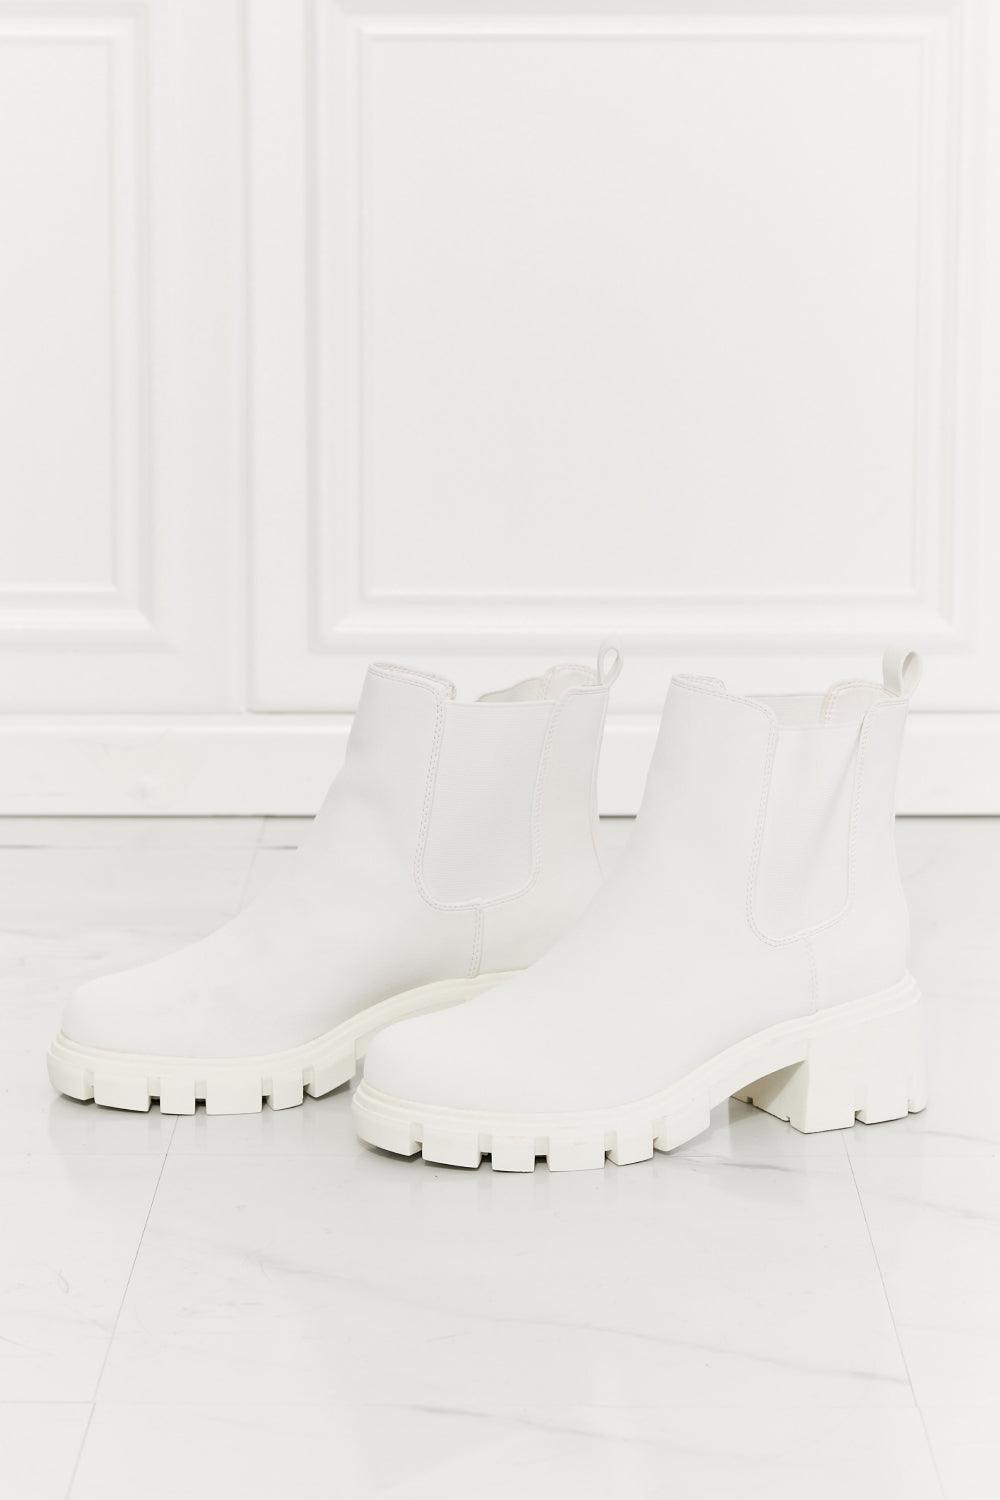 MMShoes Work For It Matte Lug Sole Chelsea Boots in White - Closet of Ren